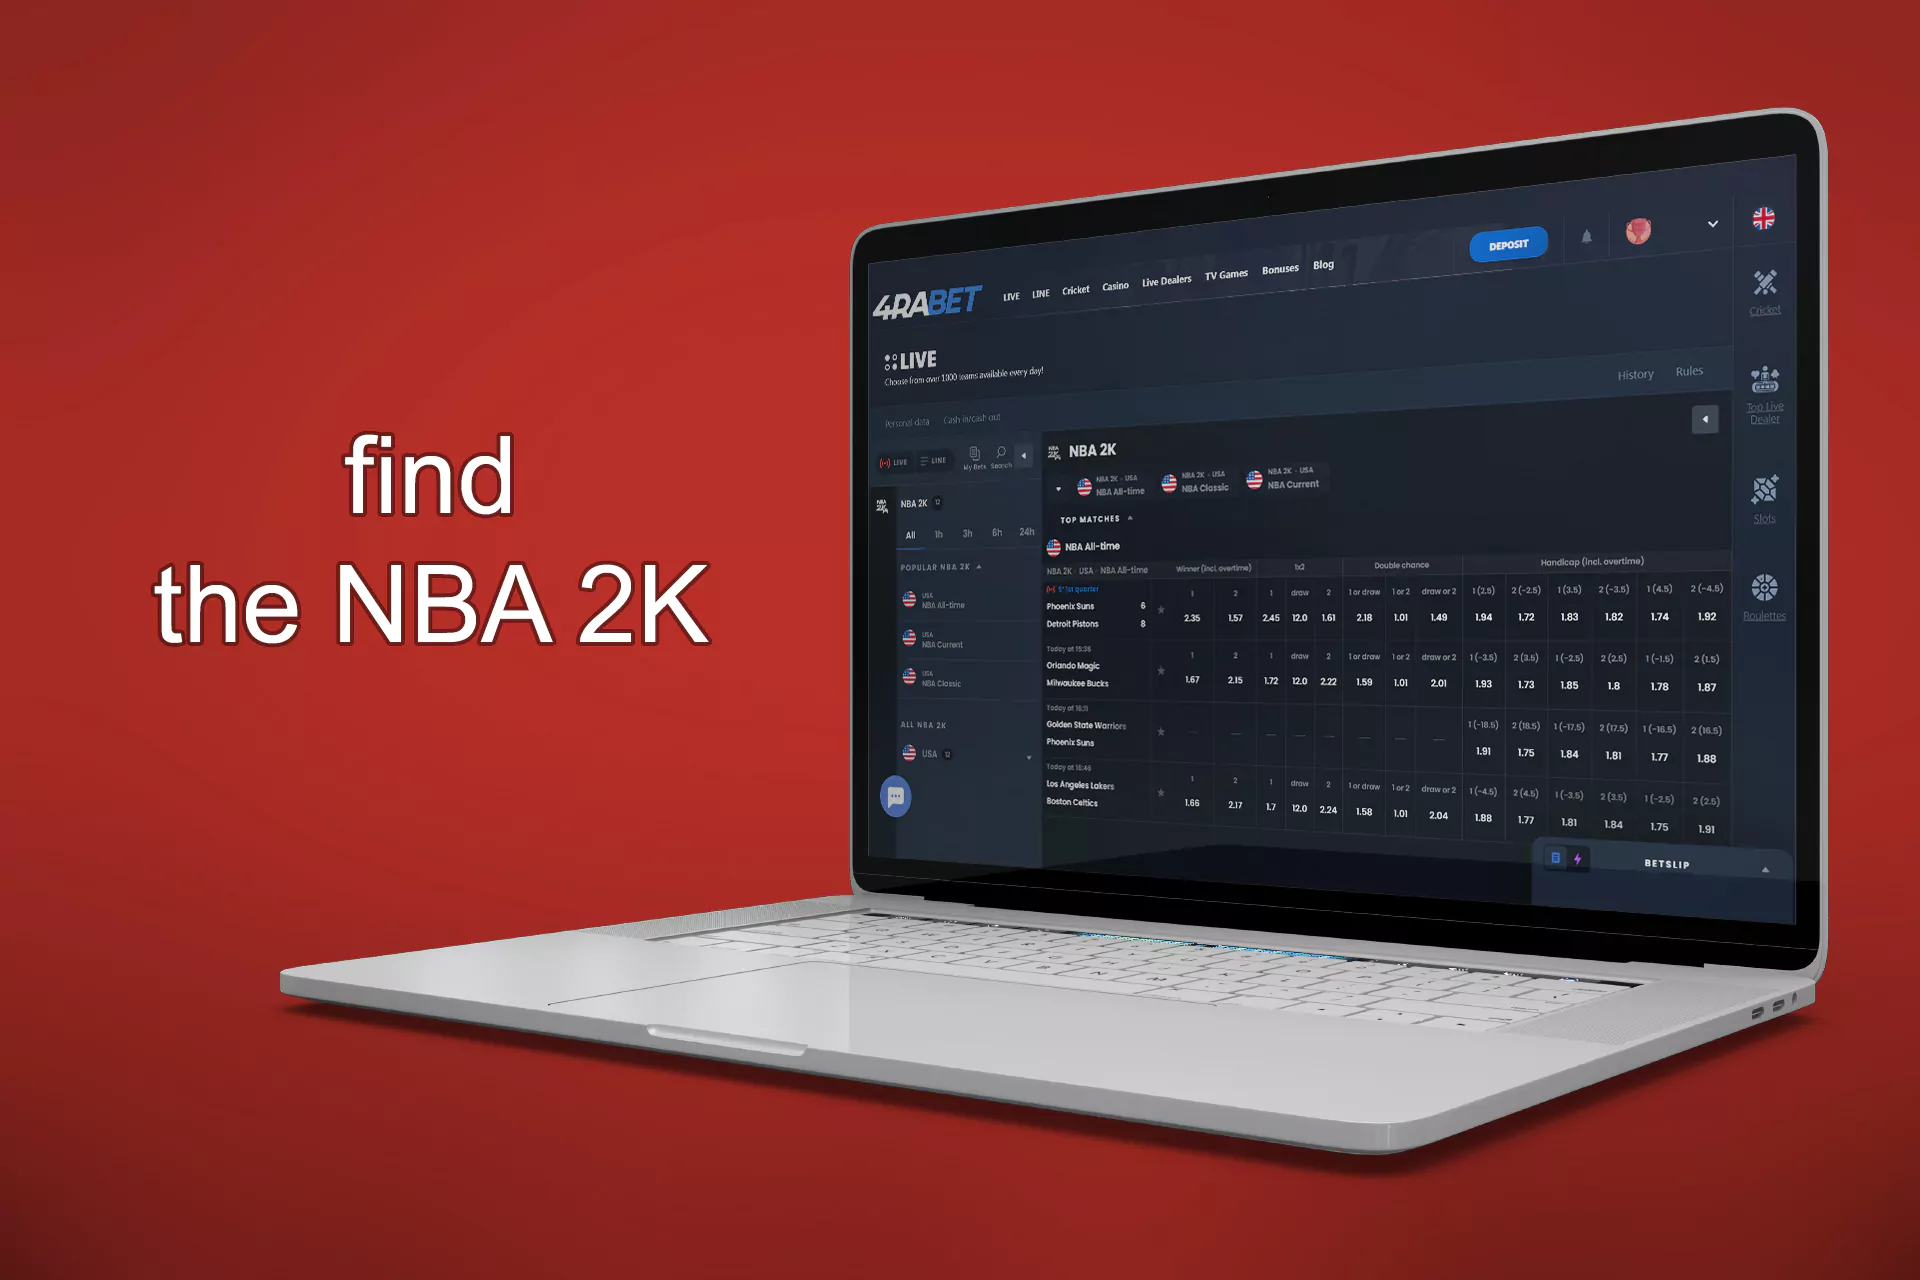 Open the betting list and find the NBA 2K game.